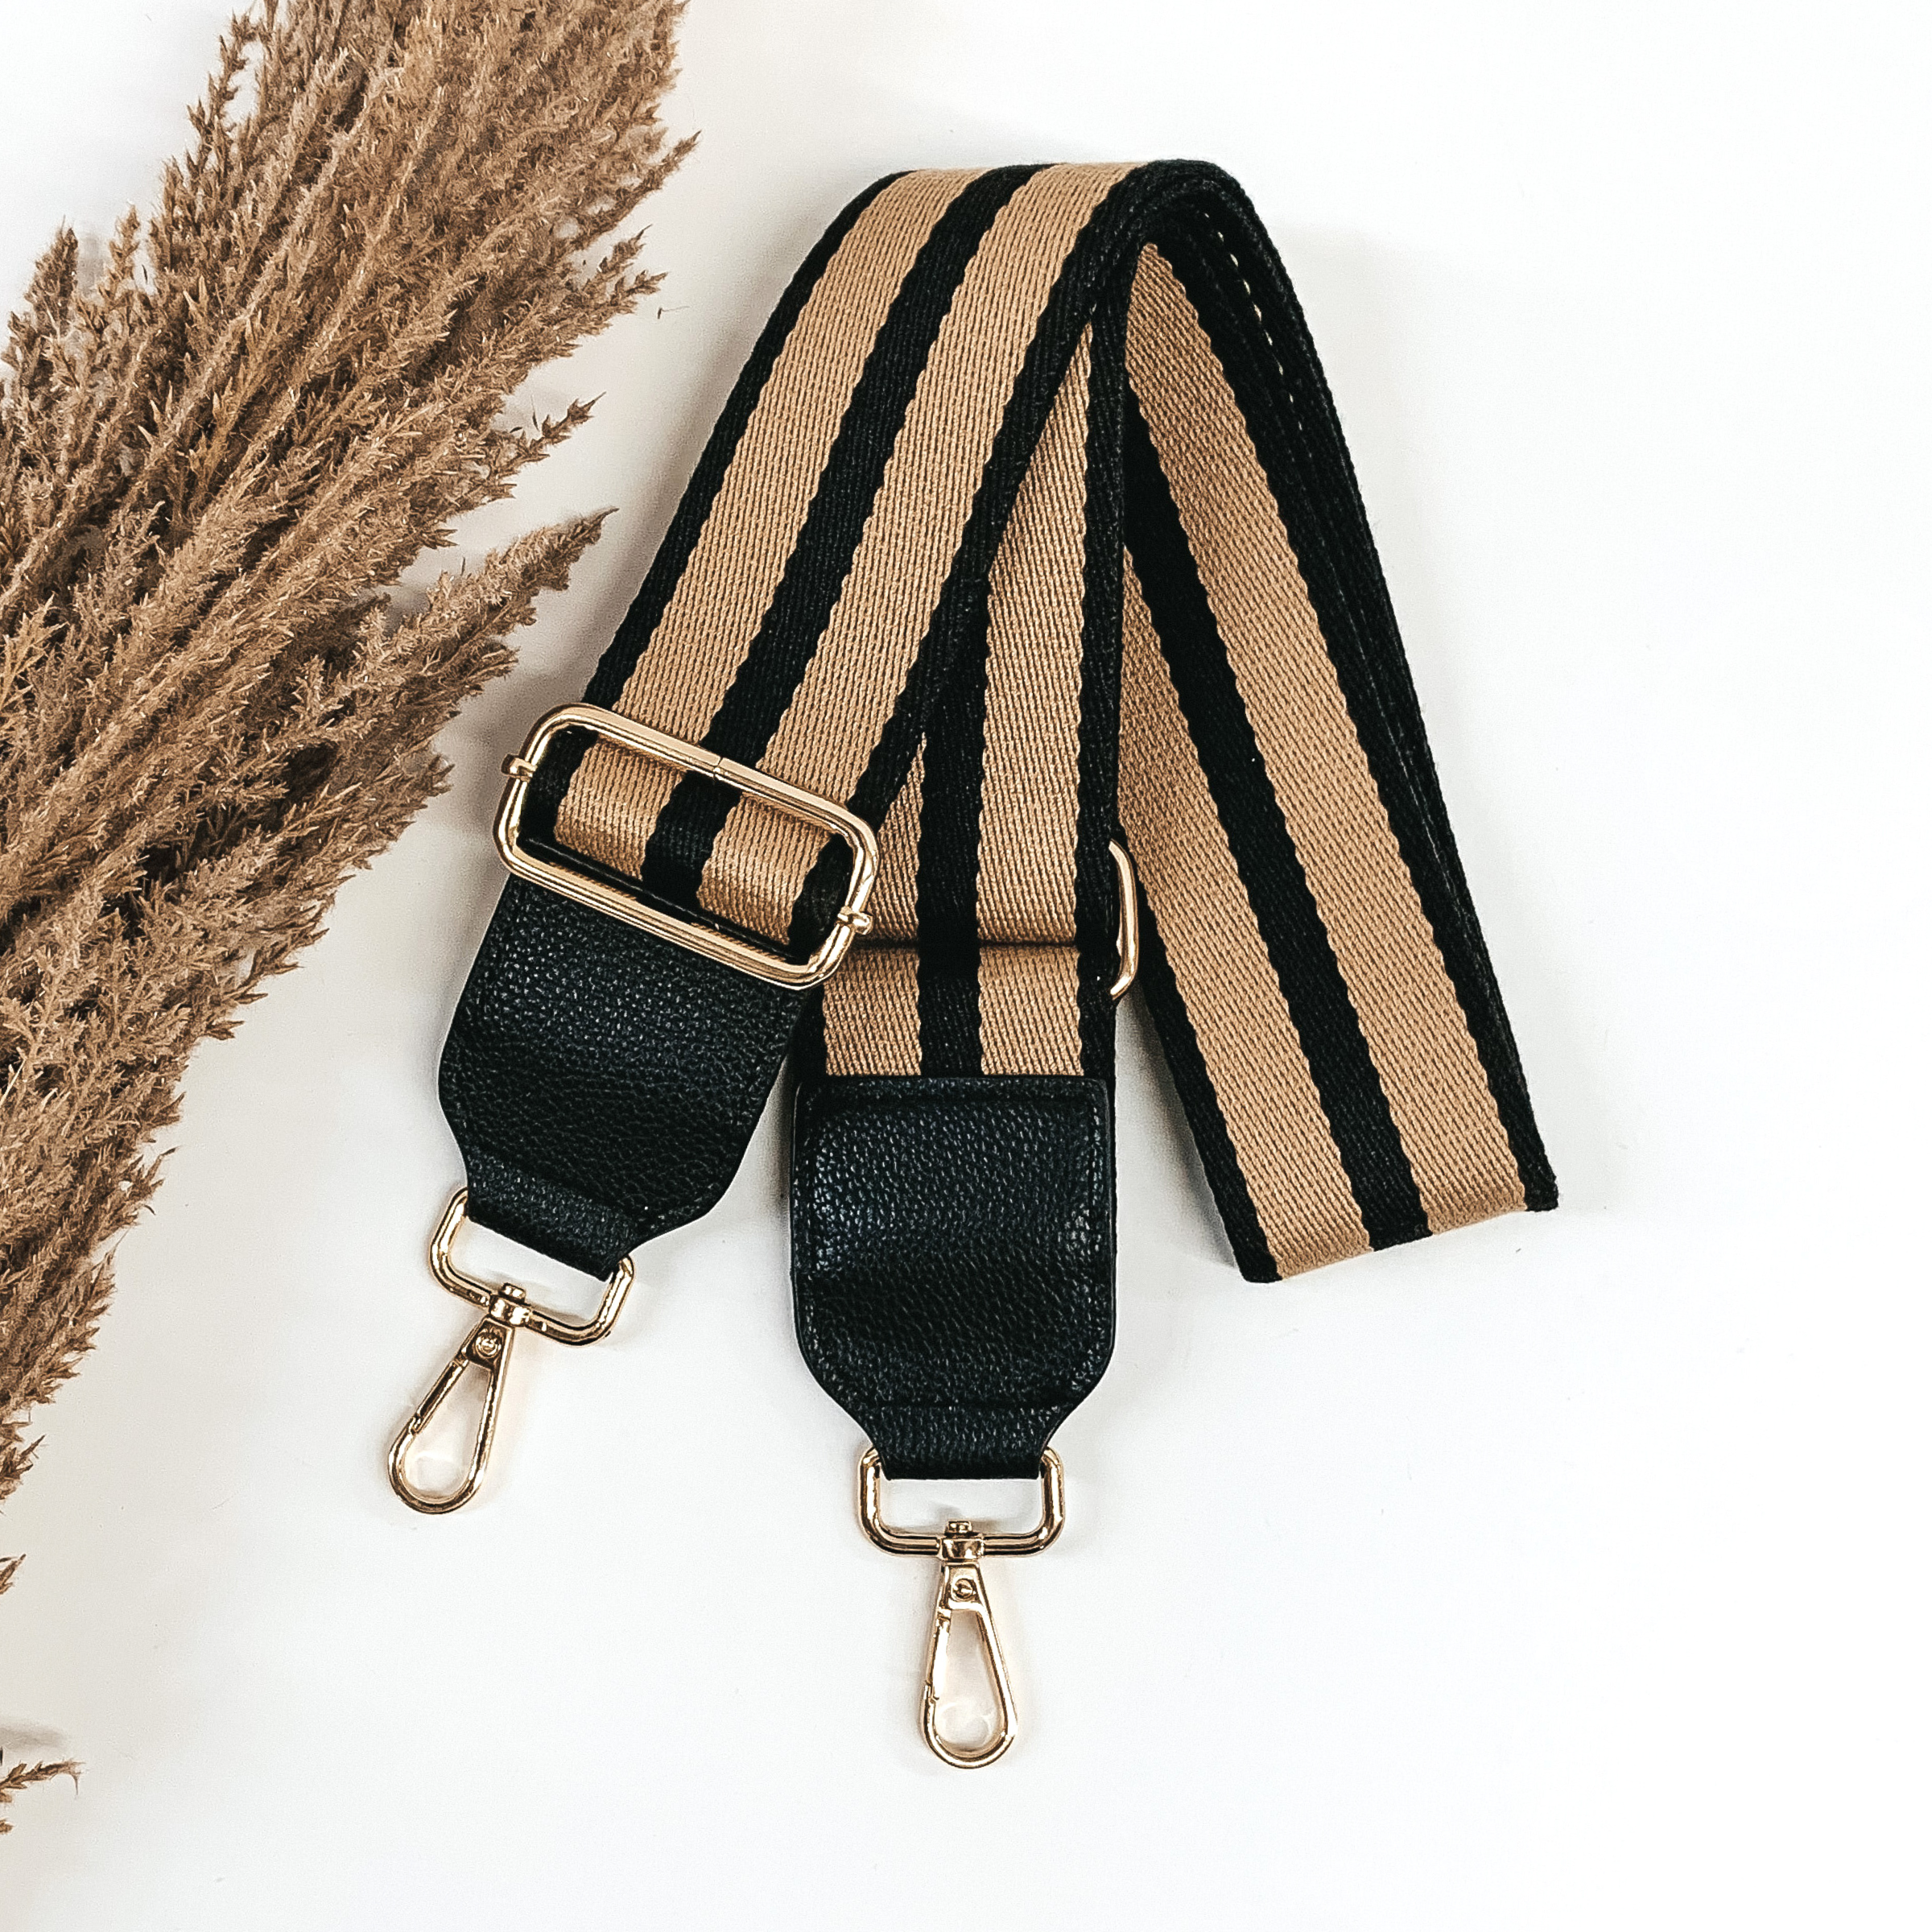 striped tan and blacked removeable purse strap